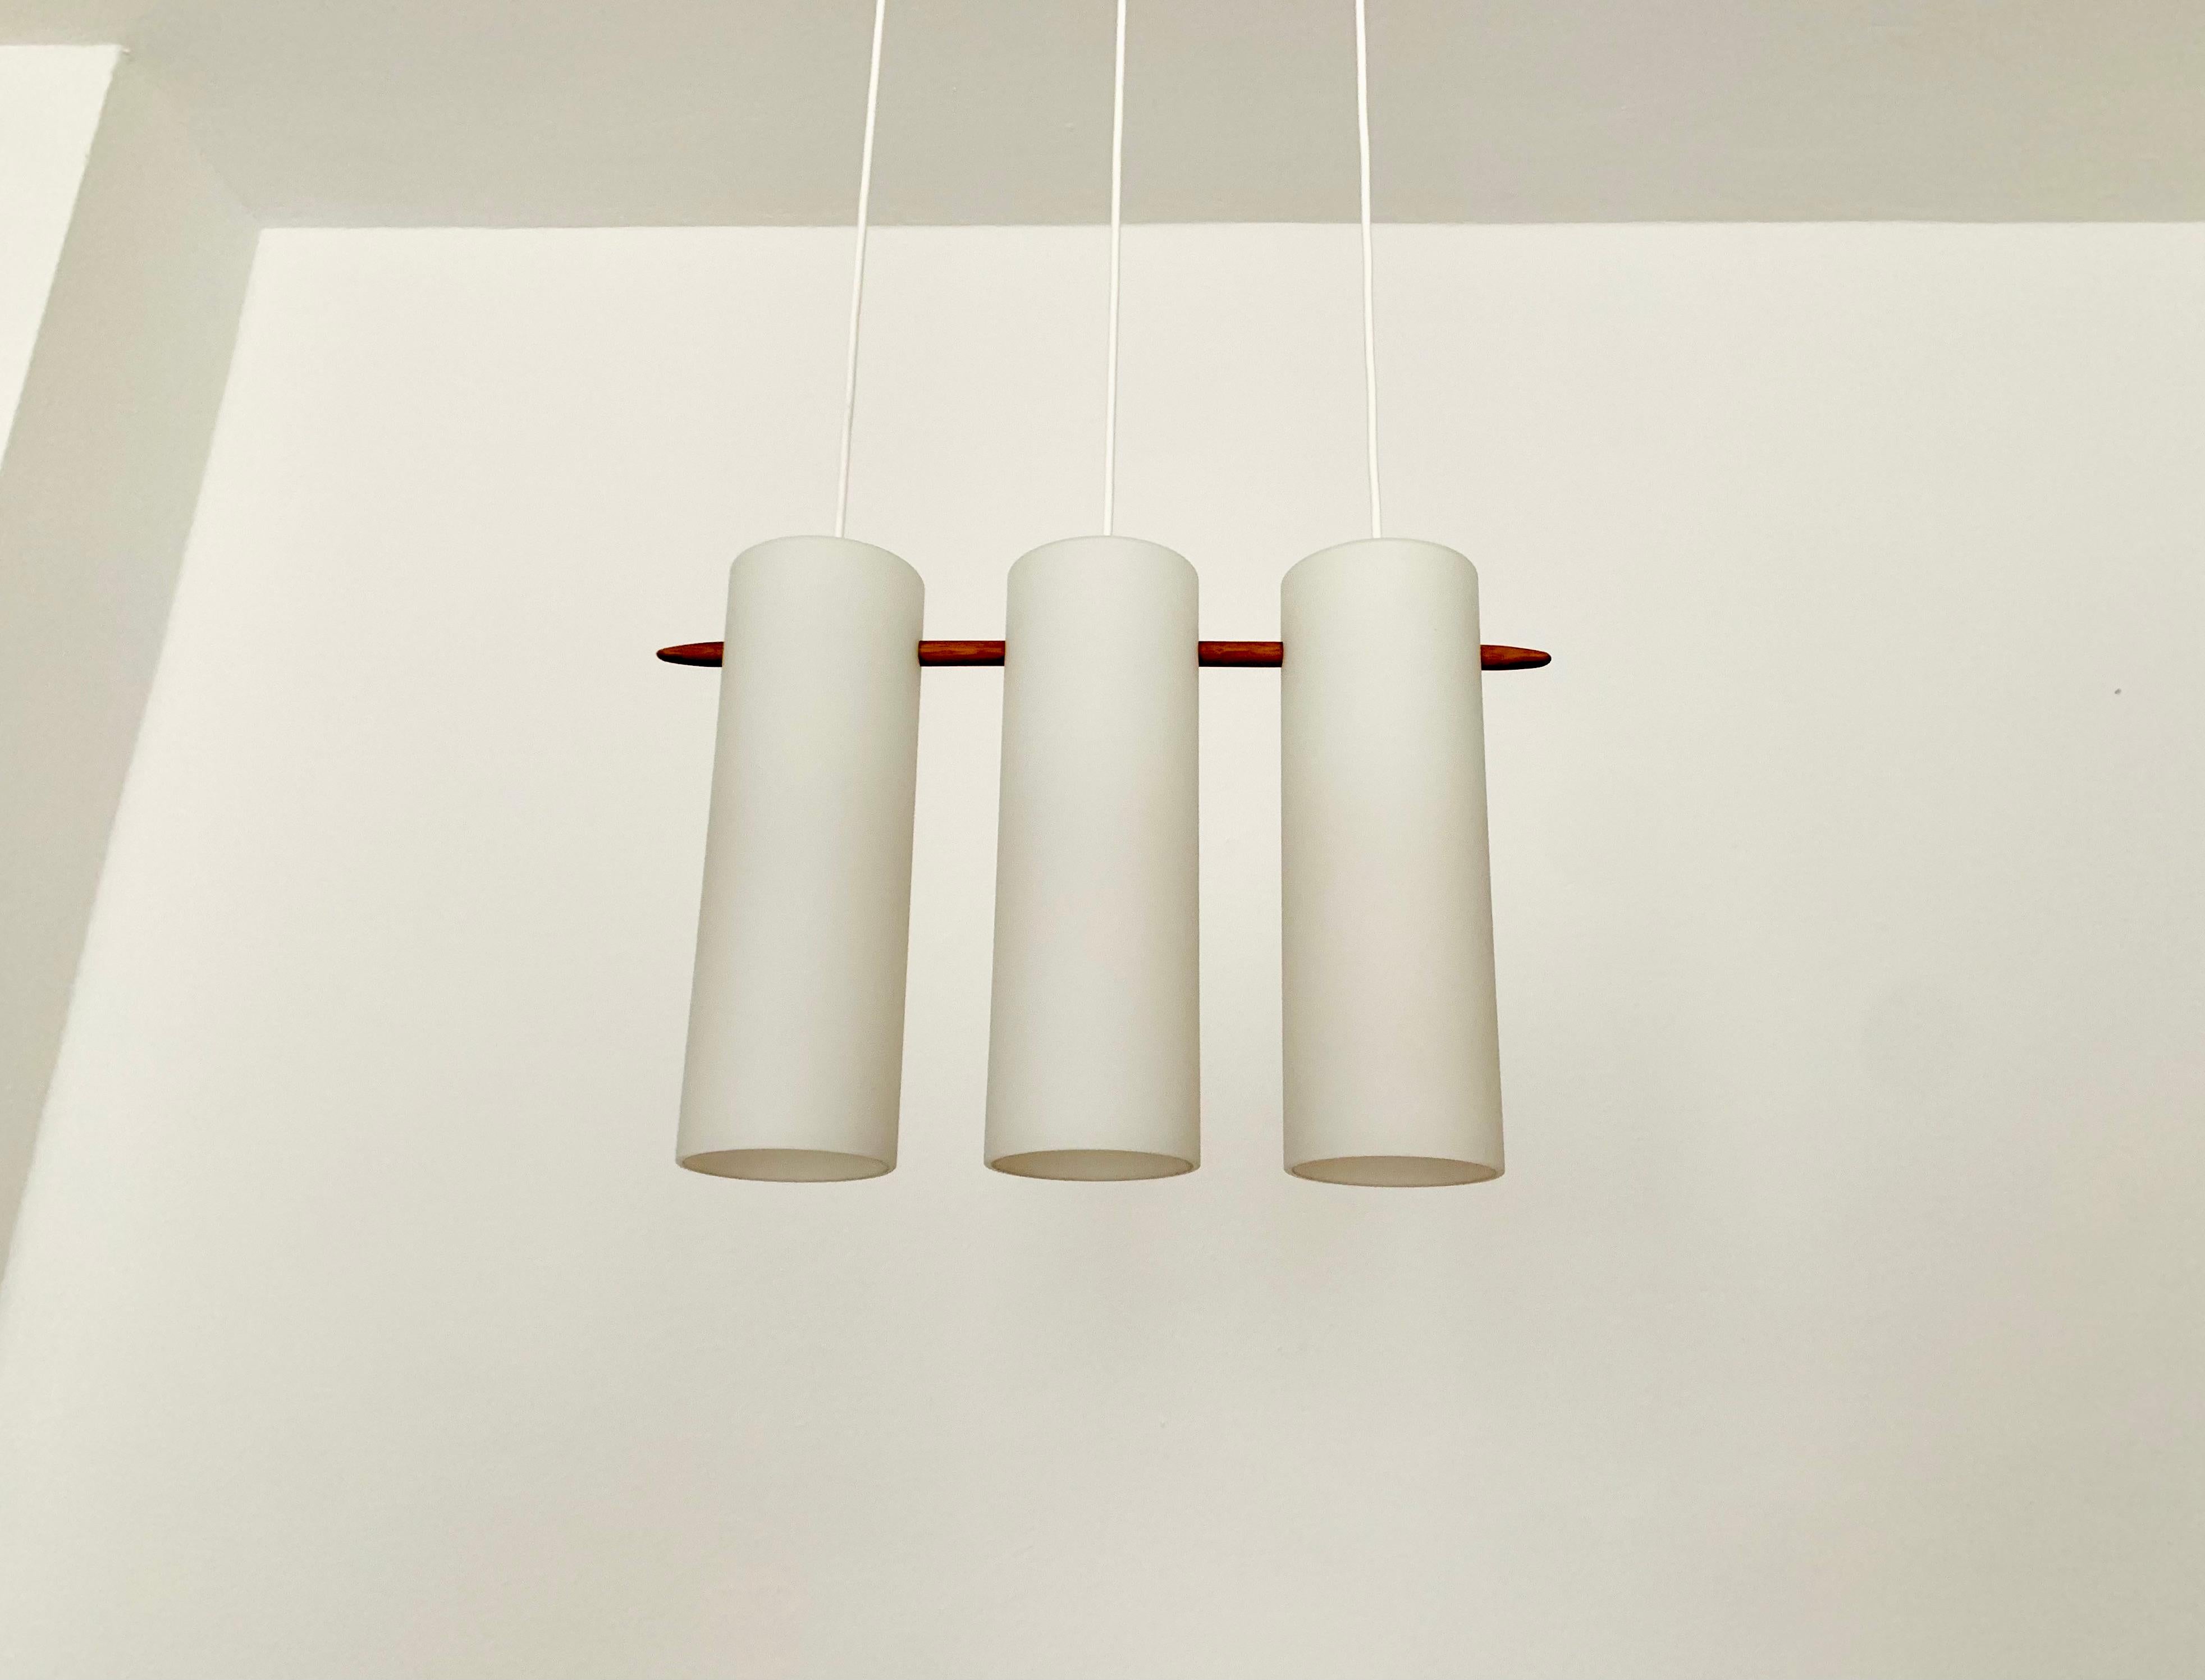 Wonderful Swedish opal glass pendant lamp from the 1960s.
Great and exceptionally minimalistic design with a fantastically elegant look.
Very nice details like the oak stick.

Manufacturer: Luxus
Design: Uno and Östen